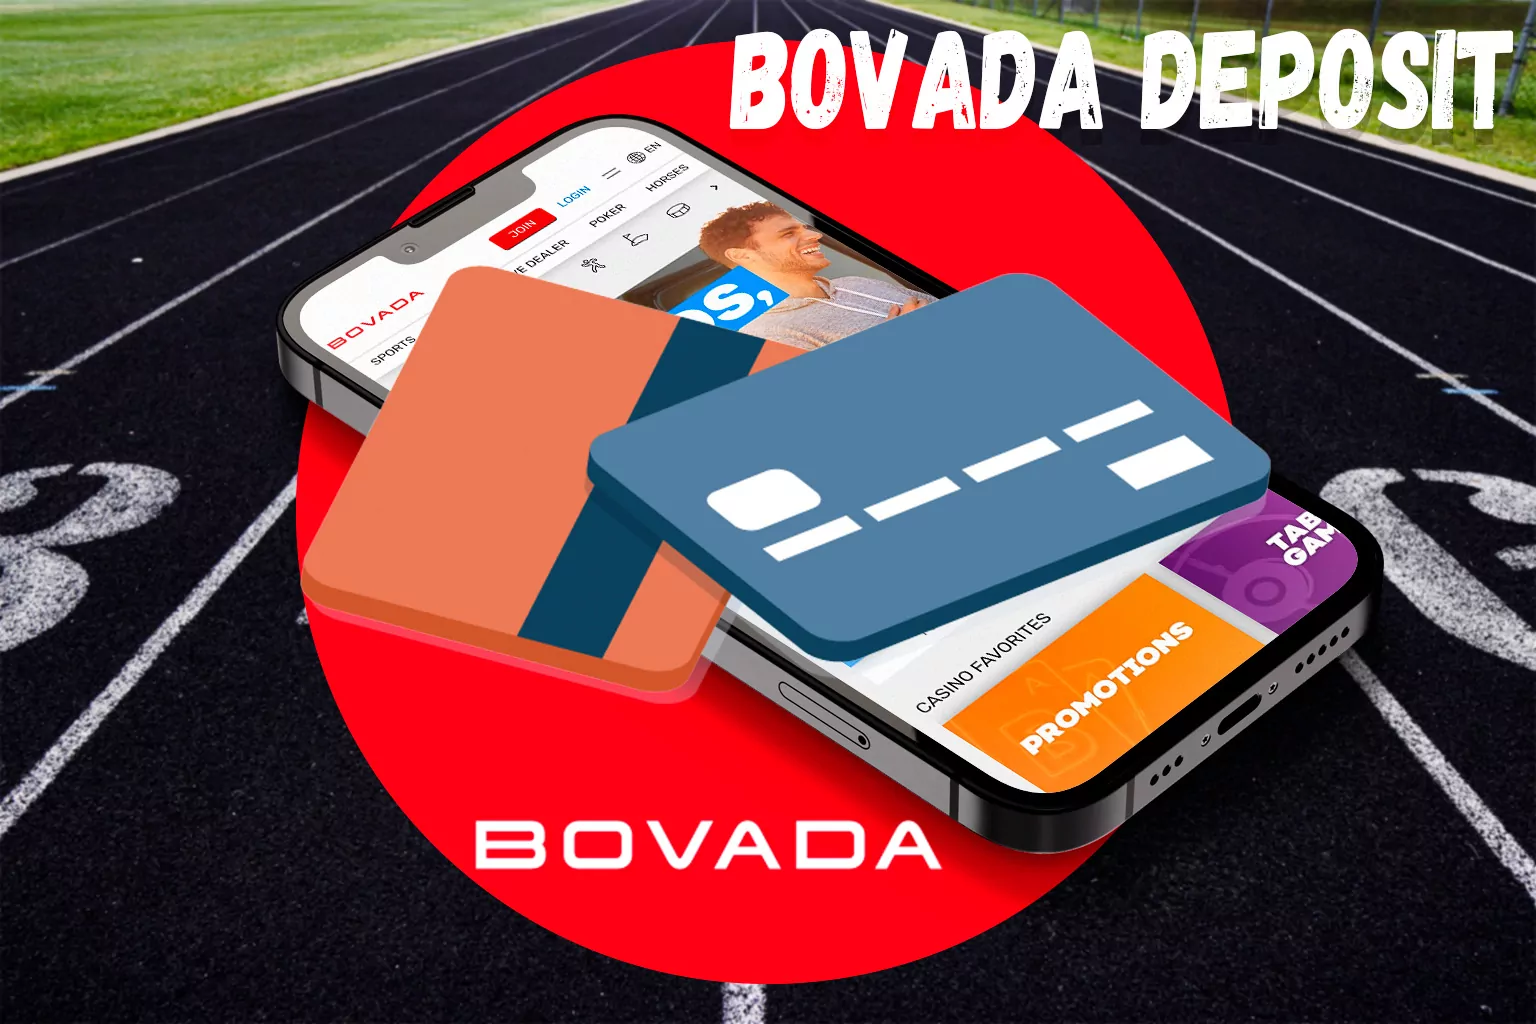 How to send money to the Bovada account, a quick guide.